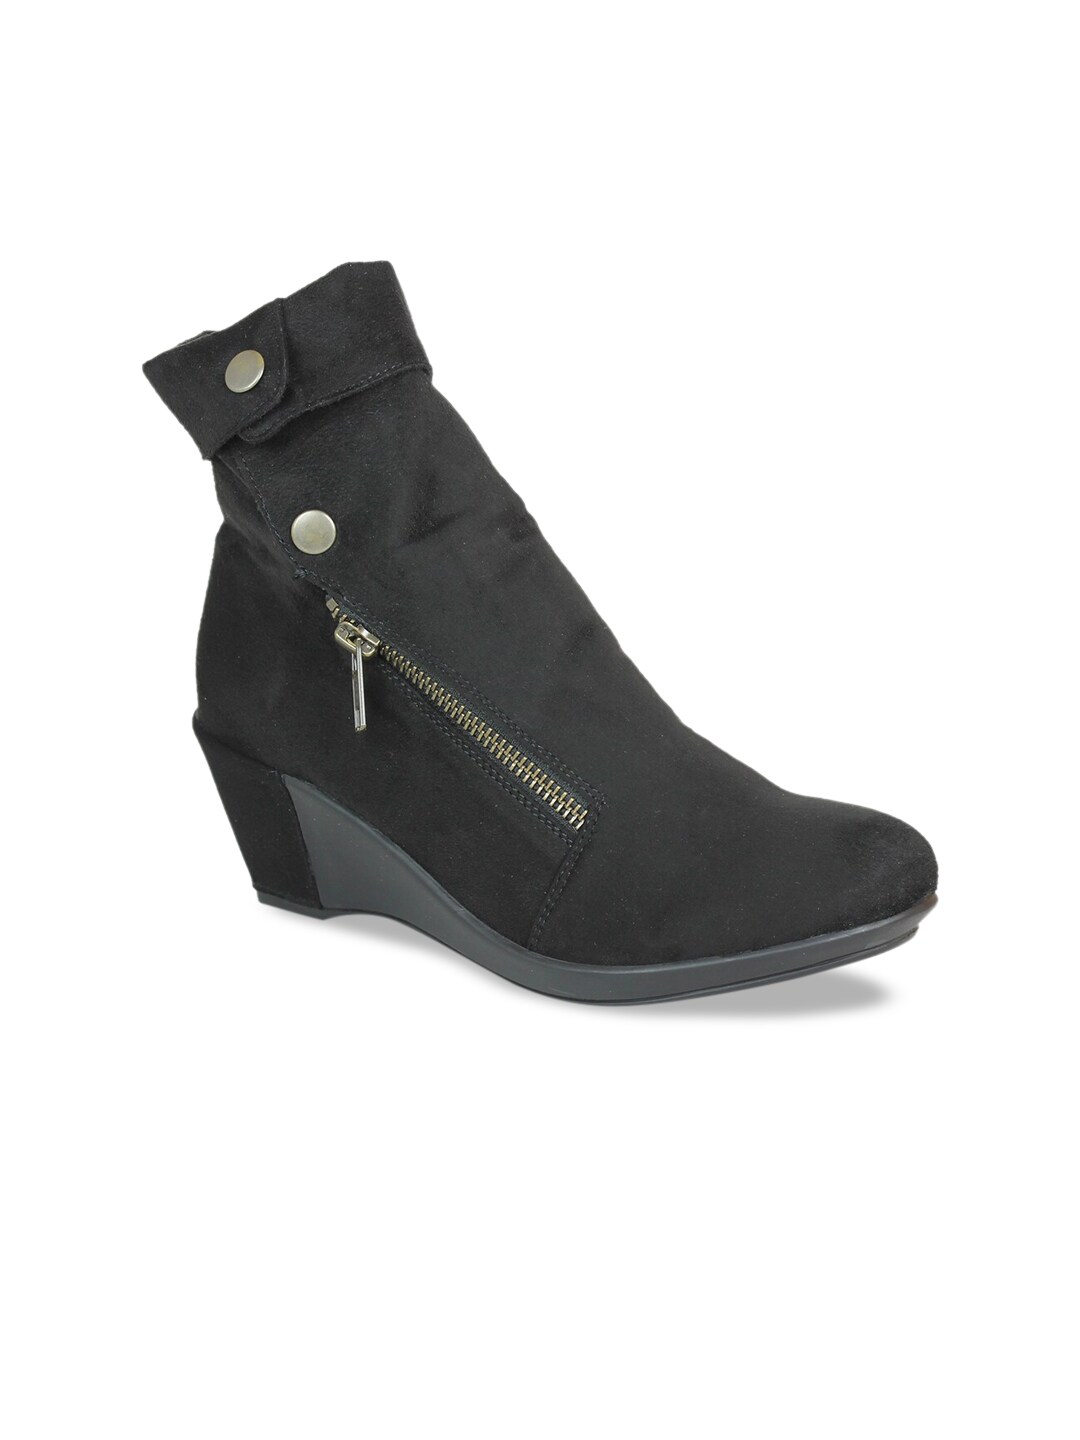 Inc 5 Black Wedge Heeled Boots with Buckles Price in India